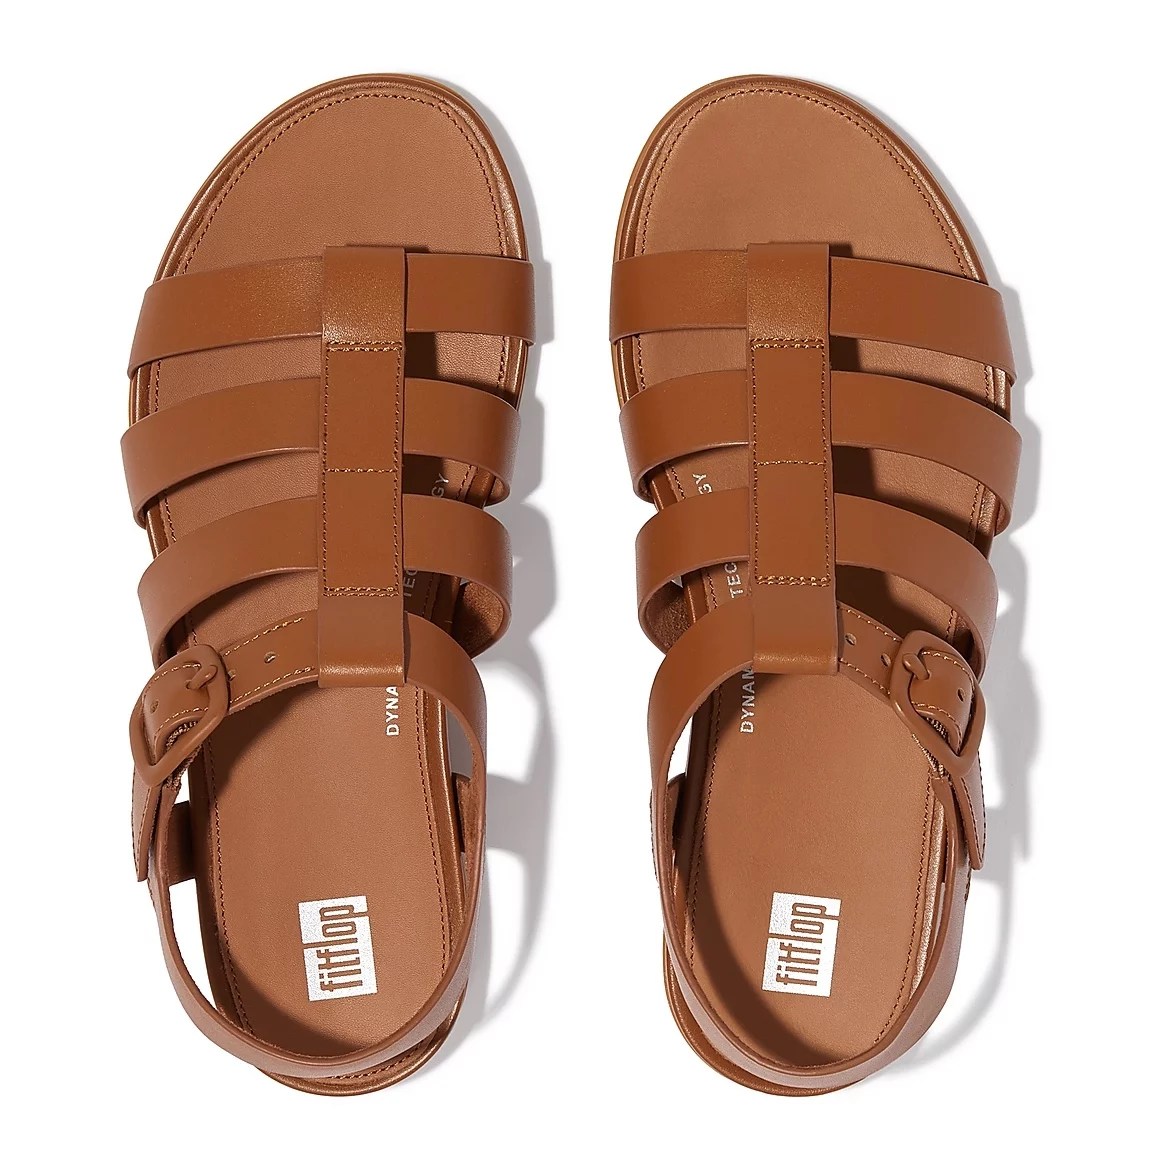 FitFlop GRACIE Matt-Buckle Leather Fisherman Sandals, best sandals with arch support